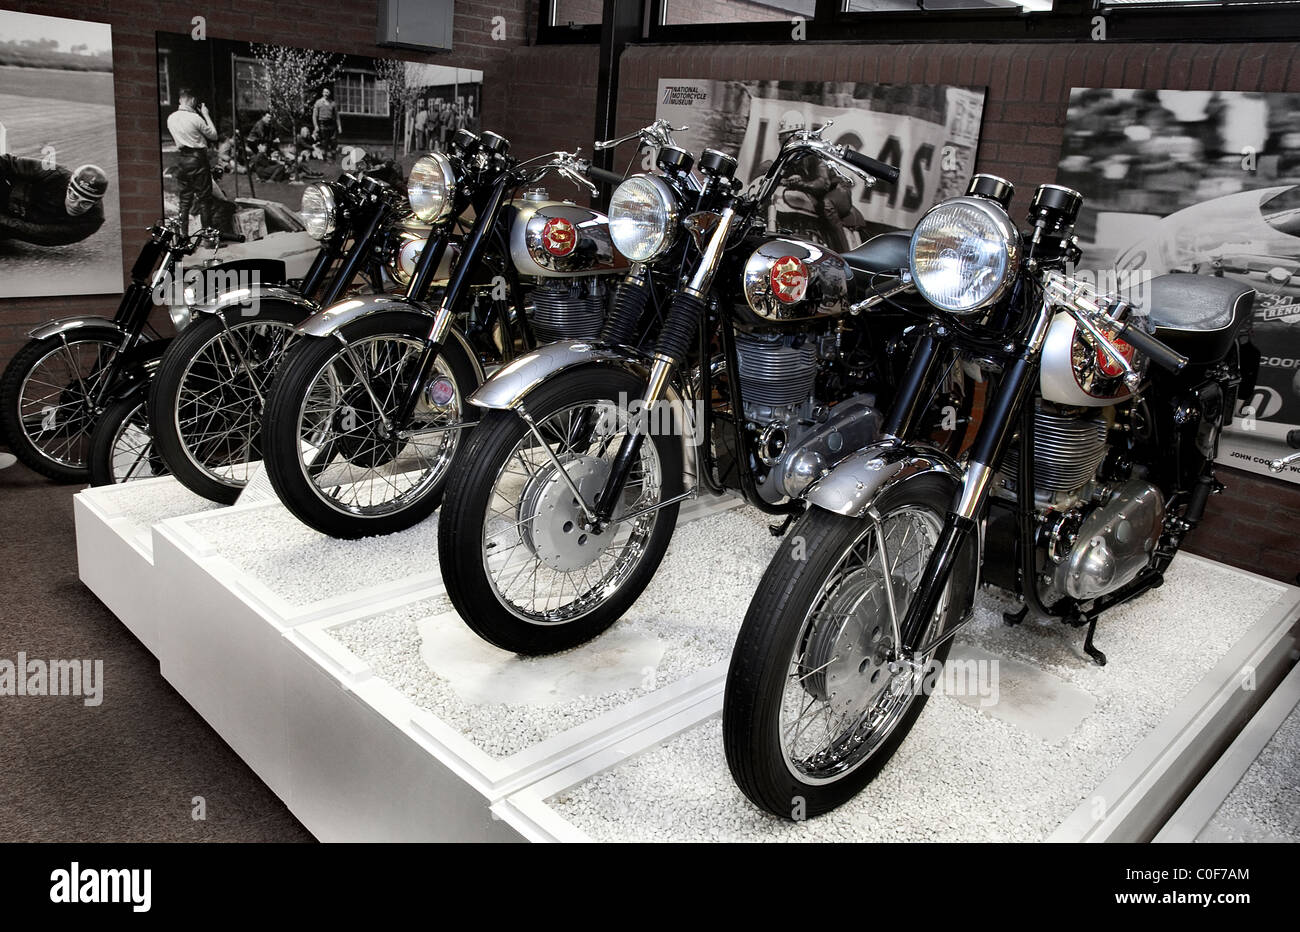 BSA gold star motocrycles presso il National Motorcycle Museum Birmingham REGNO UNITO Foto Stock